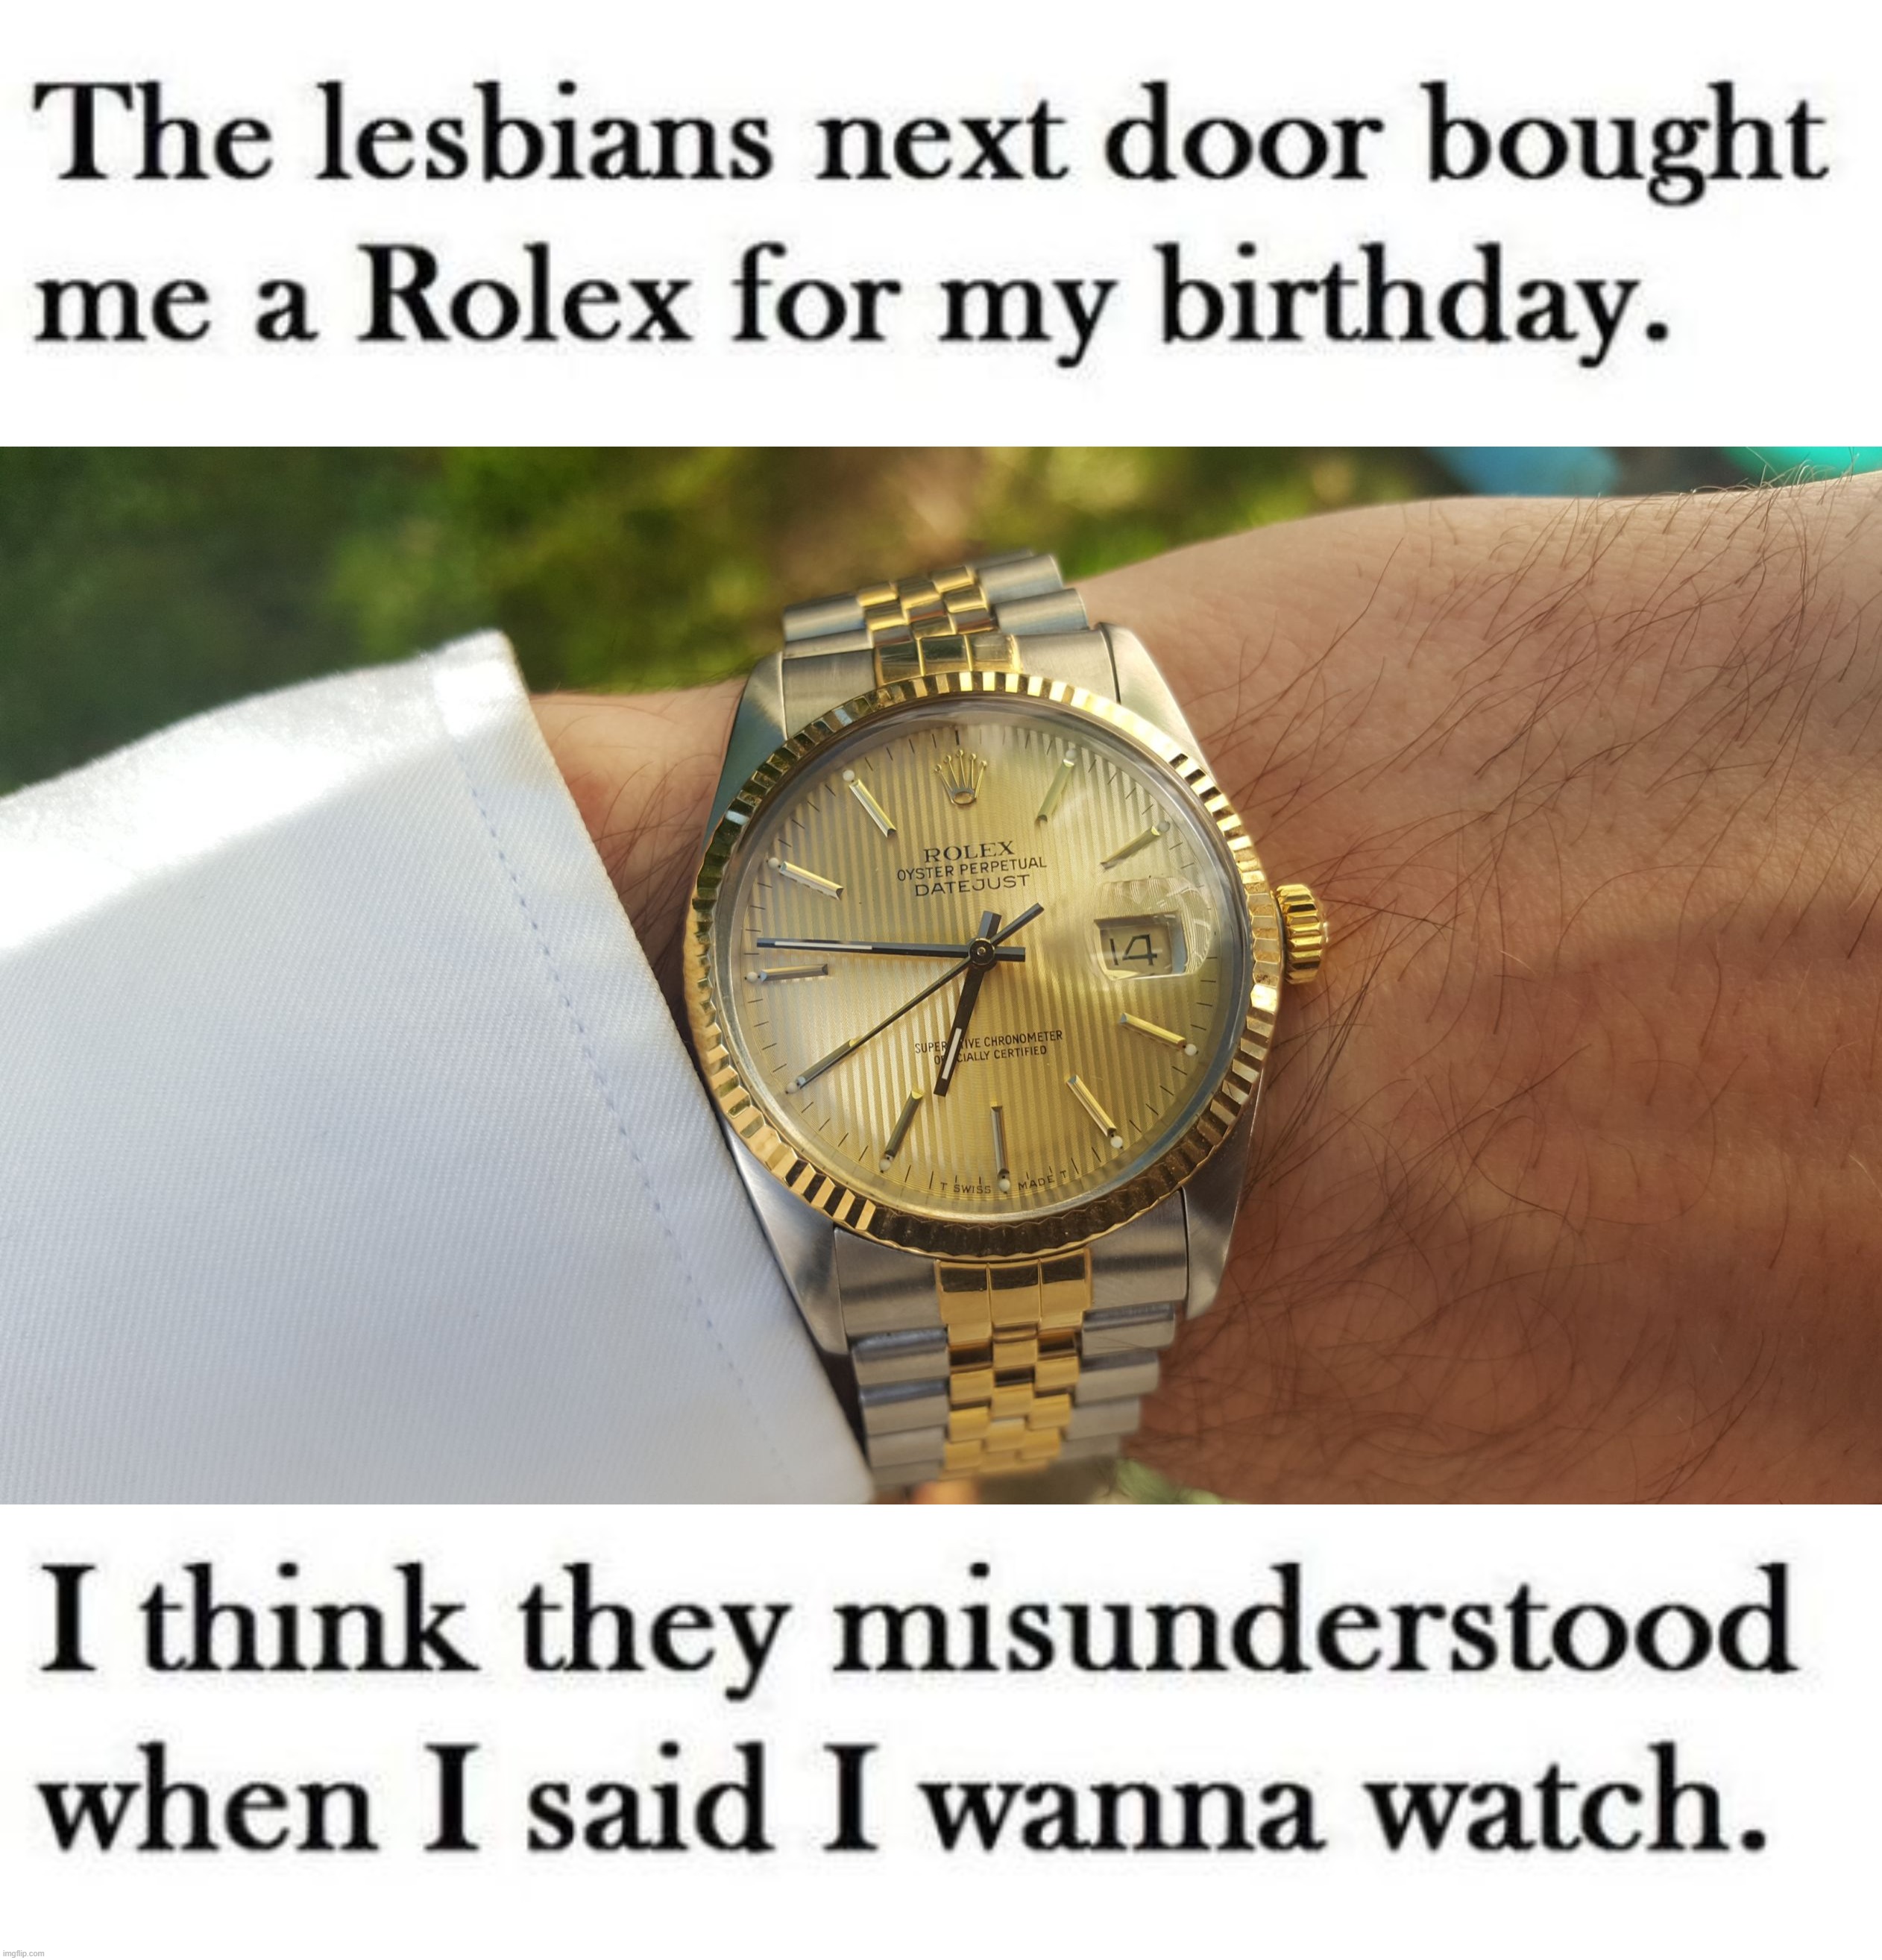 Nice watch bro | image tagged in crypto paid this rolex | made w/ Imgflip meme maker